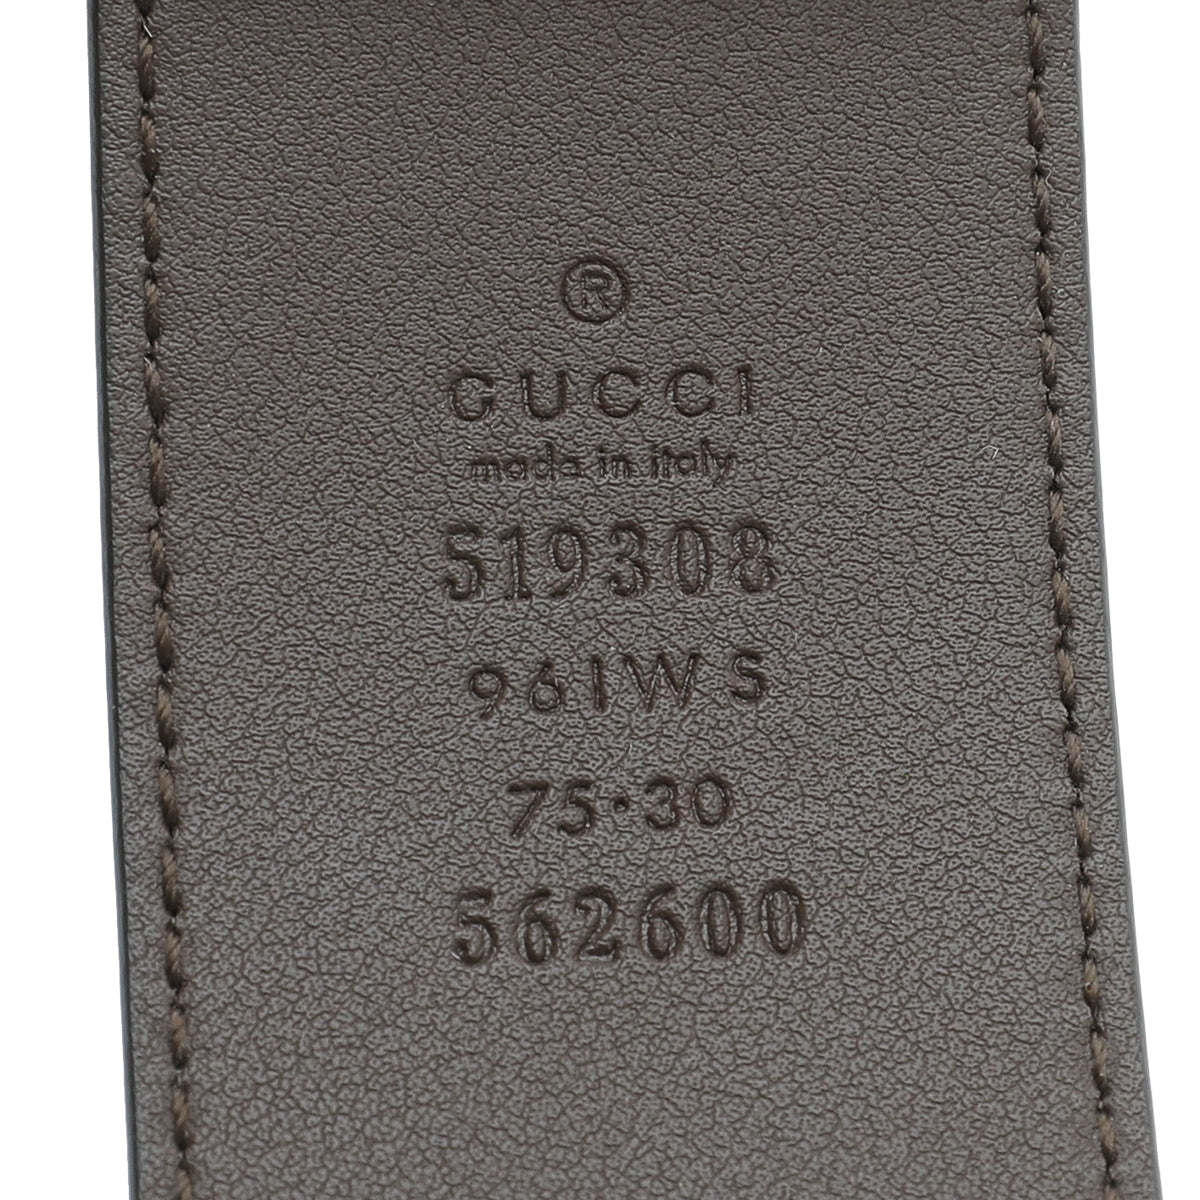 Gucci Bicolor GG Supreme Ophidia Belted Iphone Case